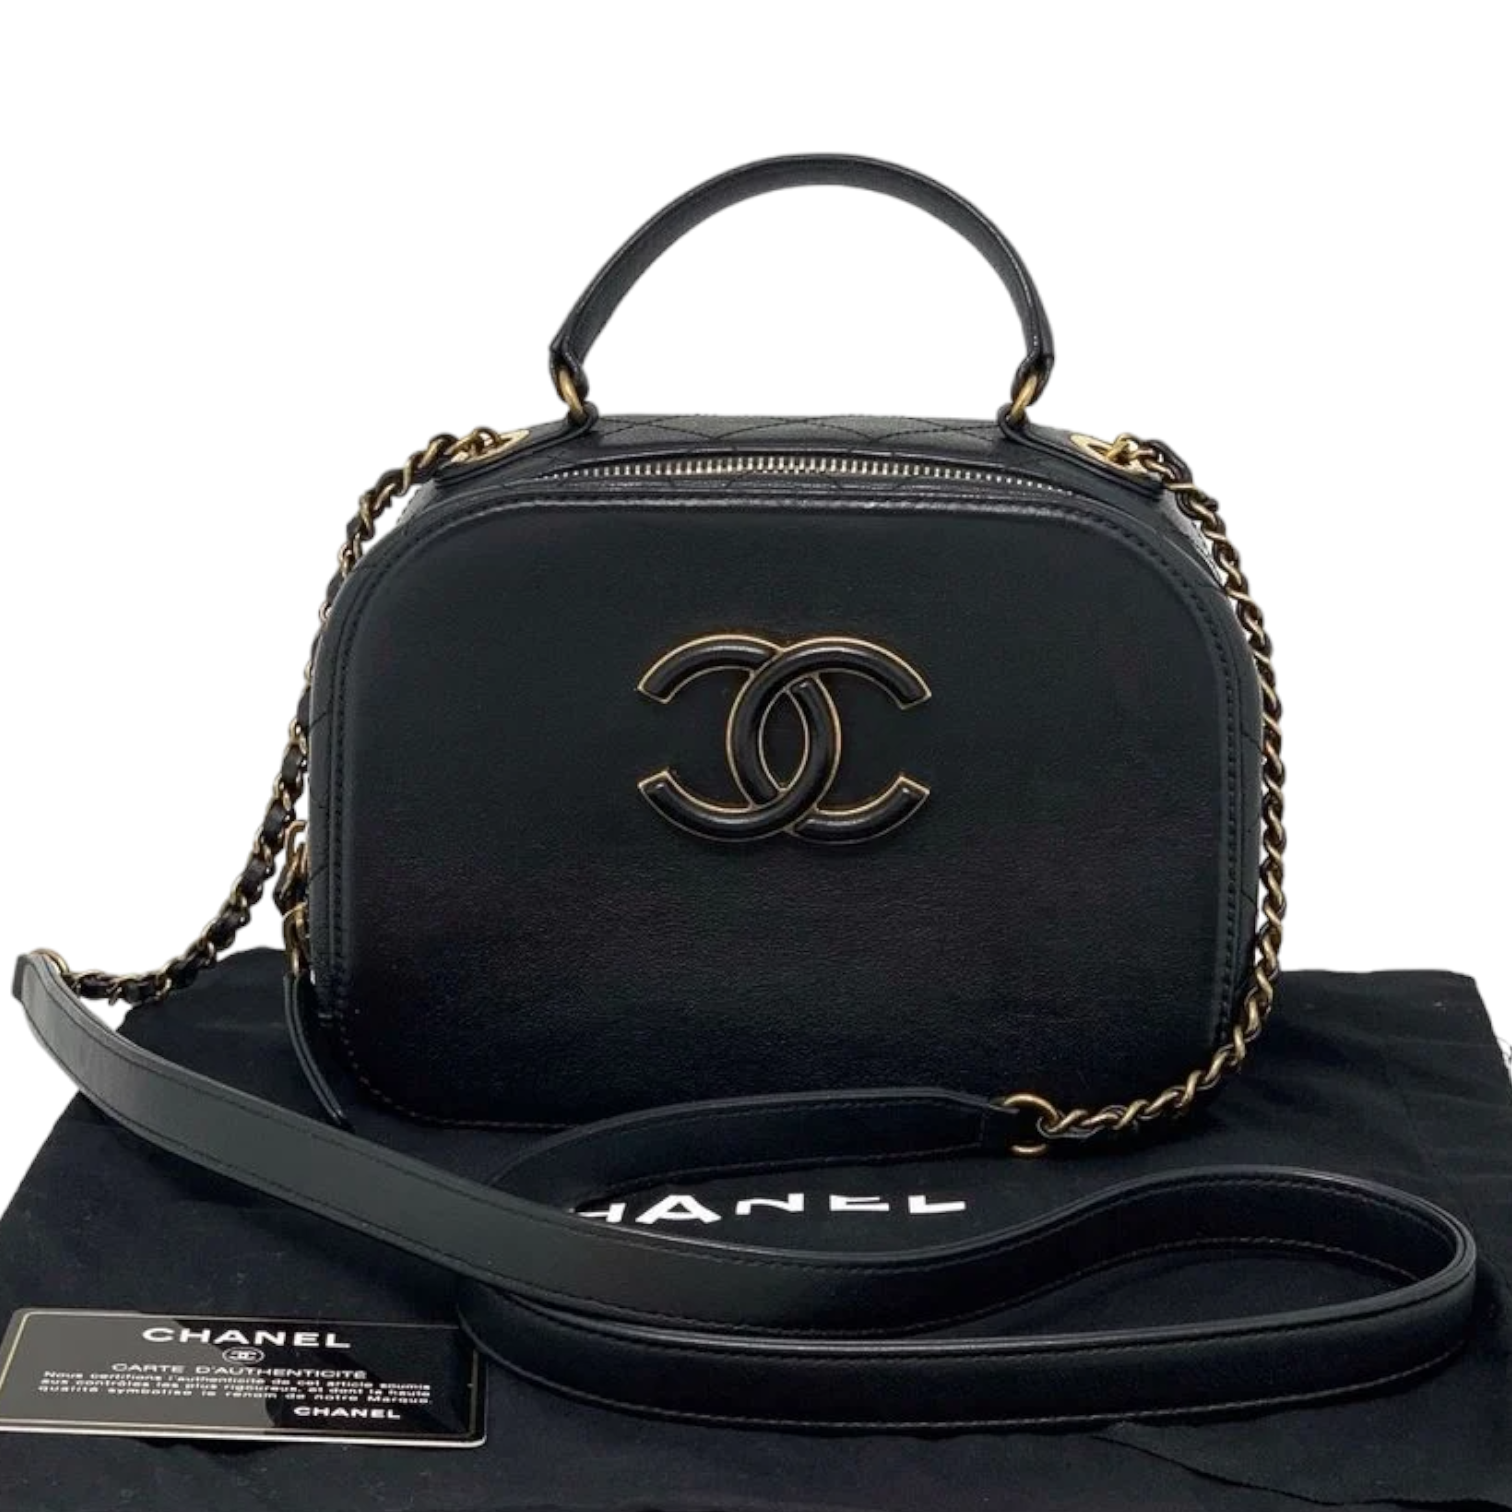 Chanel - Large Coco Curve Flap Bag - Black - Pre-Loved